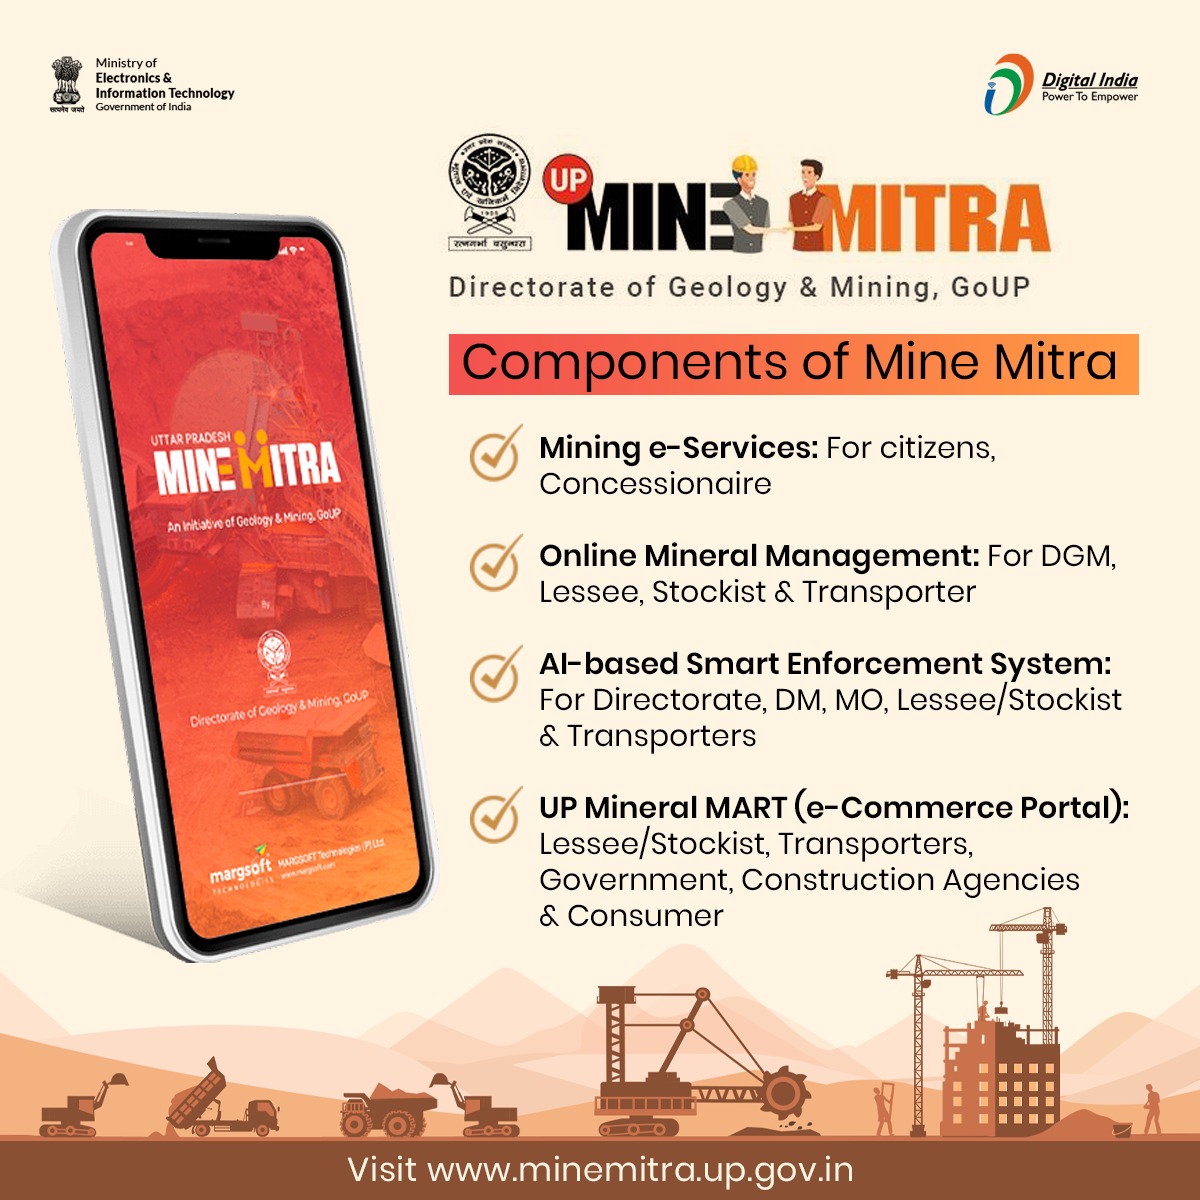 #MineMitra - A truly integrated platform for transparent mining management & citizen-centric services

API Integration with @MORTHIndia's (VAHAN) & other State Govt depts. #DigitalIndia #MineAwarenessday @MinesMinIndia